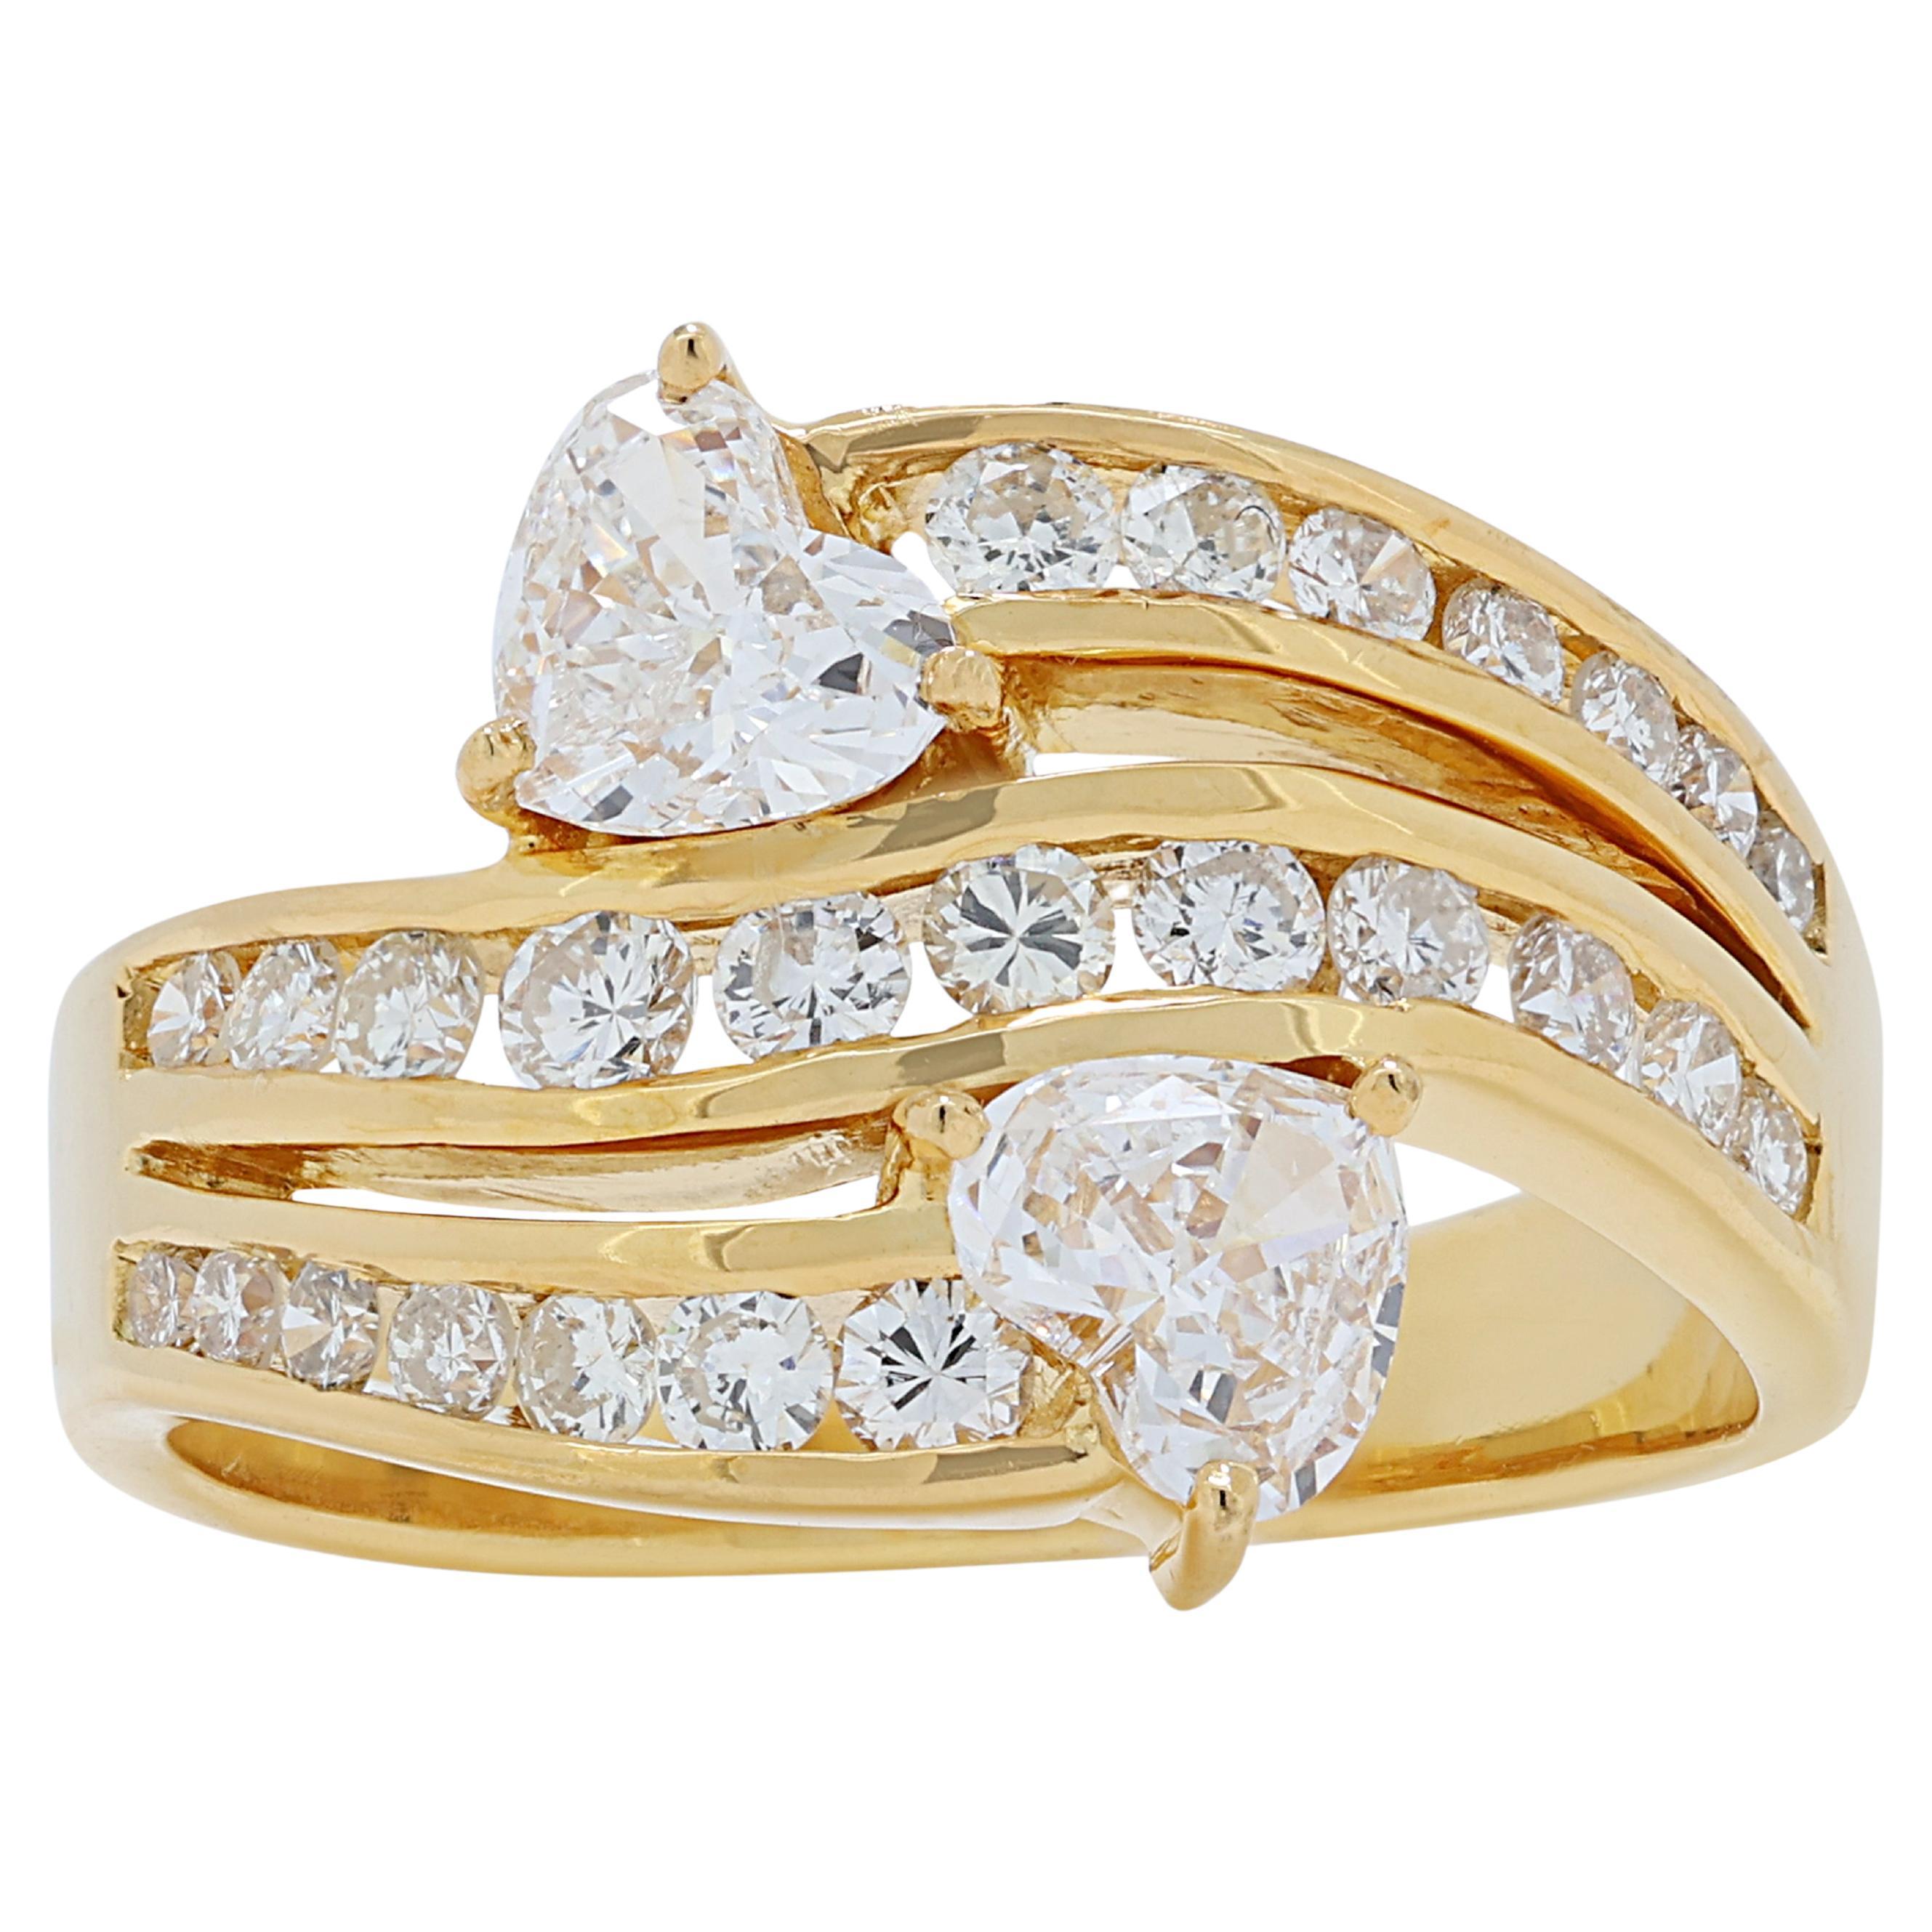 Sophisticated 1.12ct Heart-Shaped Diamonds Cluster Ring in 18k Yellow Gold For Sale